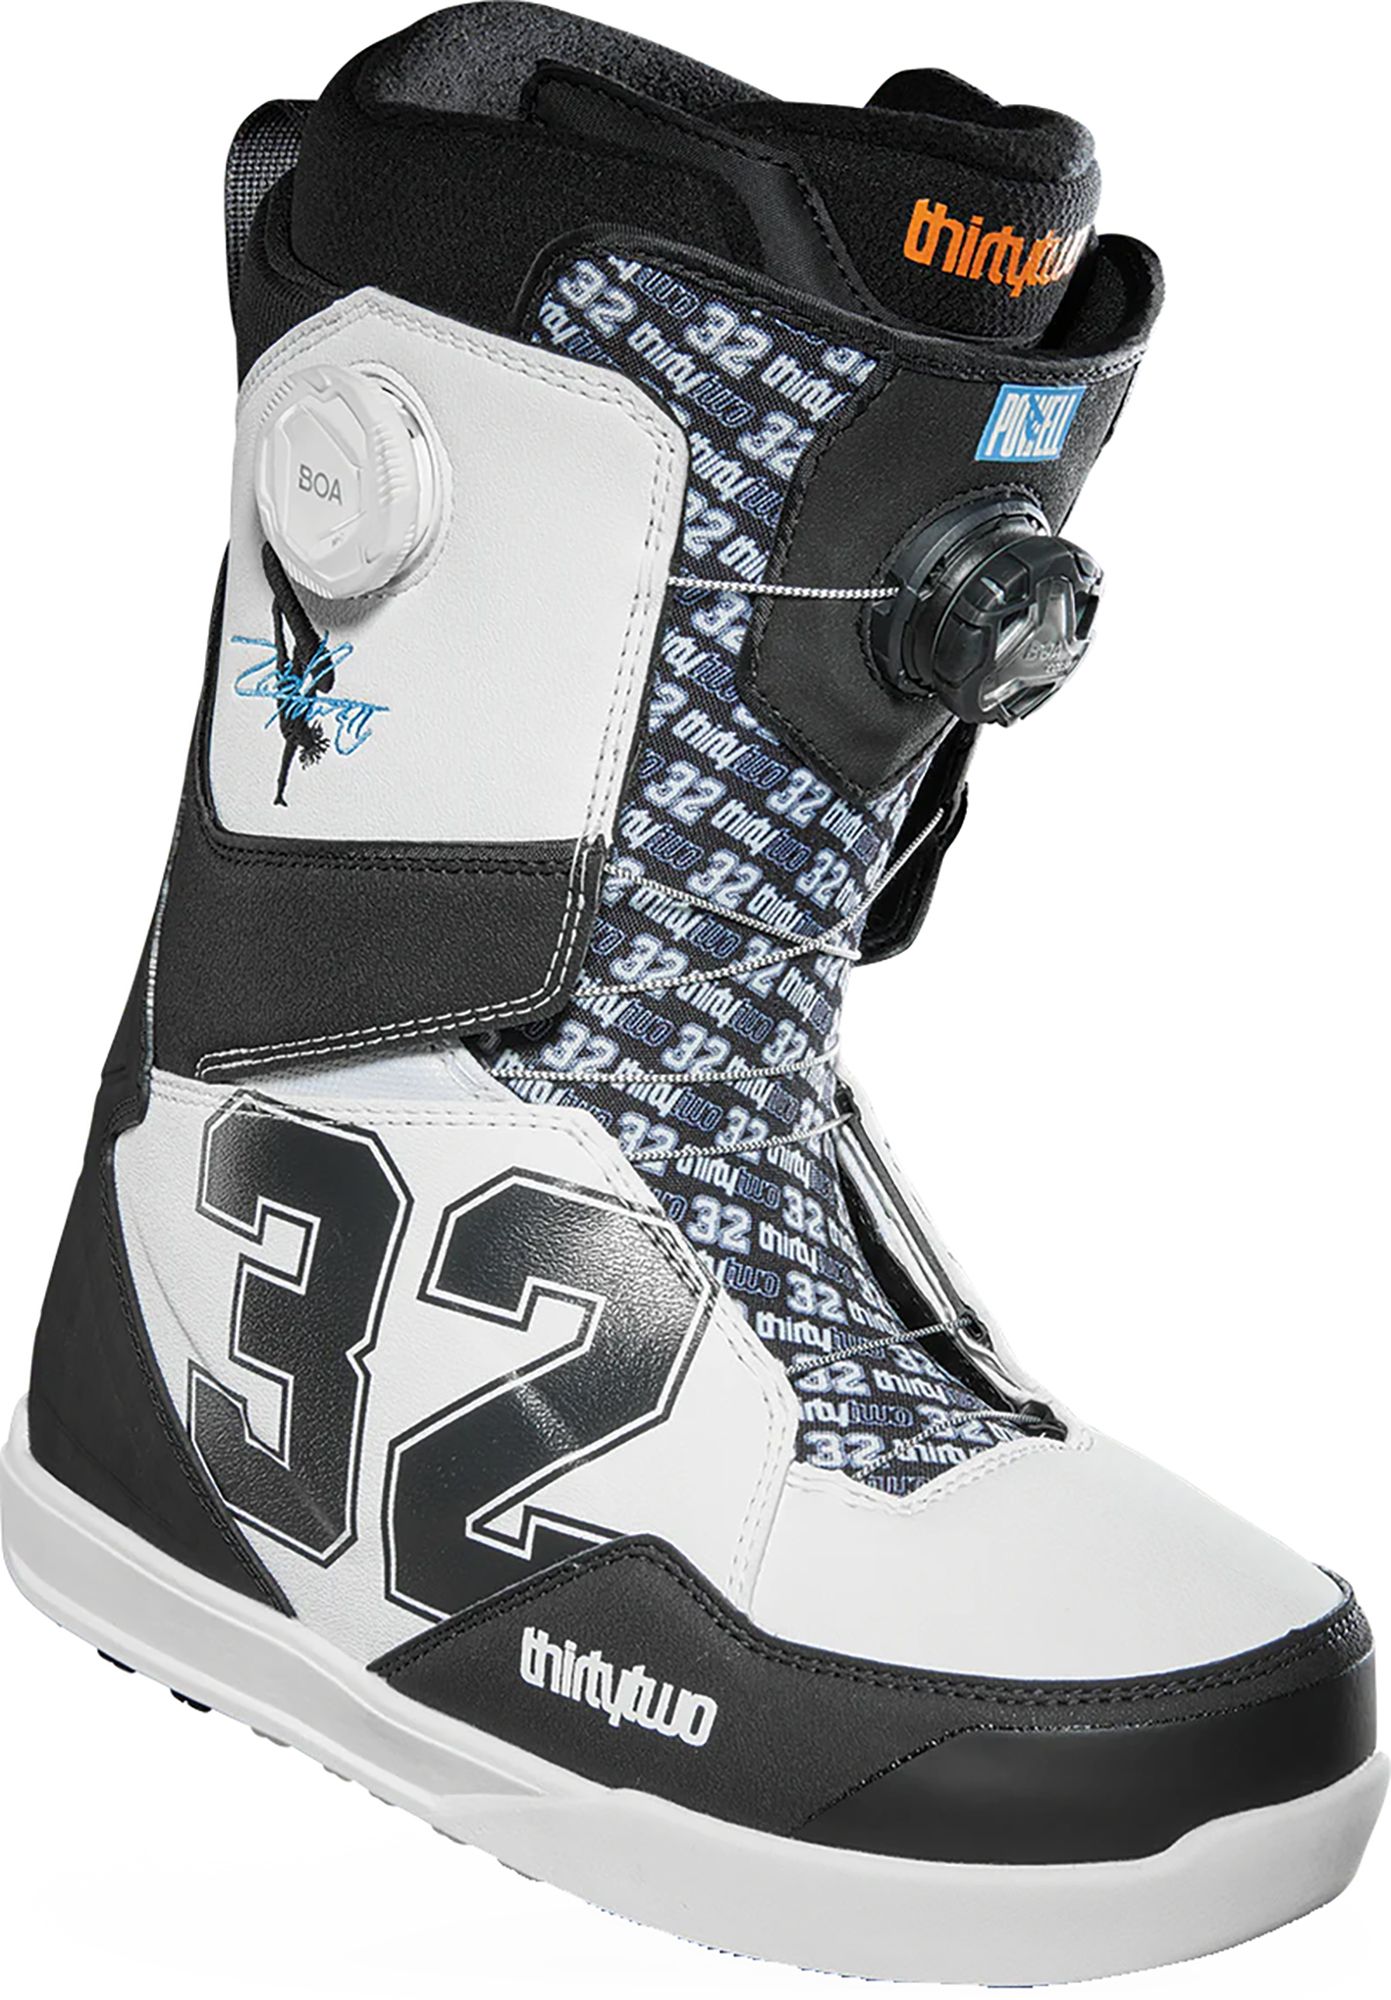 Photos - Ski Boots ThirtyTwo Men's Lashed Double BOA Snowboard Boots, Size 9.5, Zeb Powell Wh 